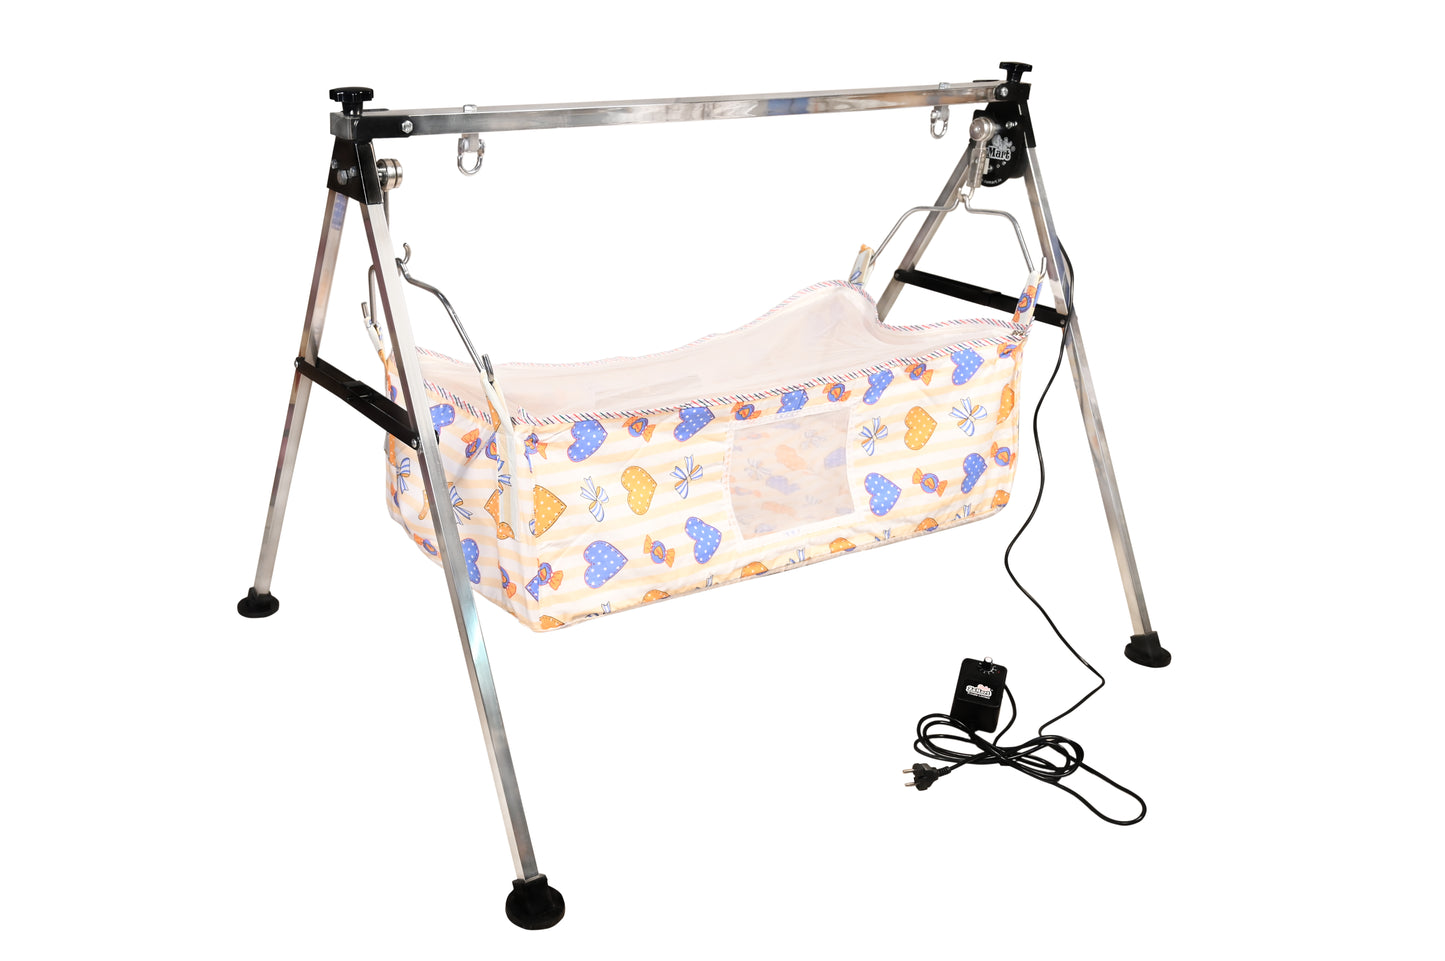 4 FOOT LIGHT WEIGHT SQUARE CRADLE KIT ( WEIGHT 5.5KG )